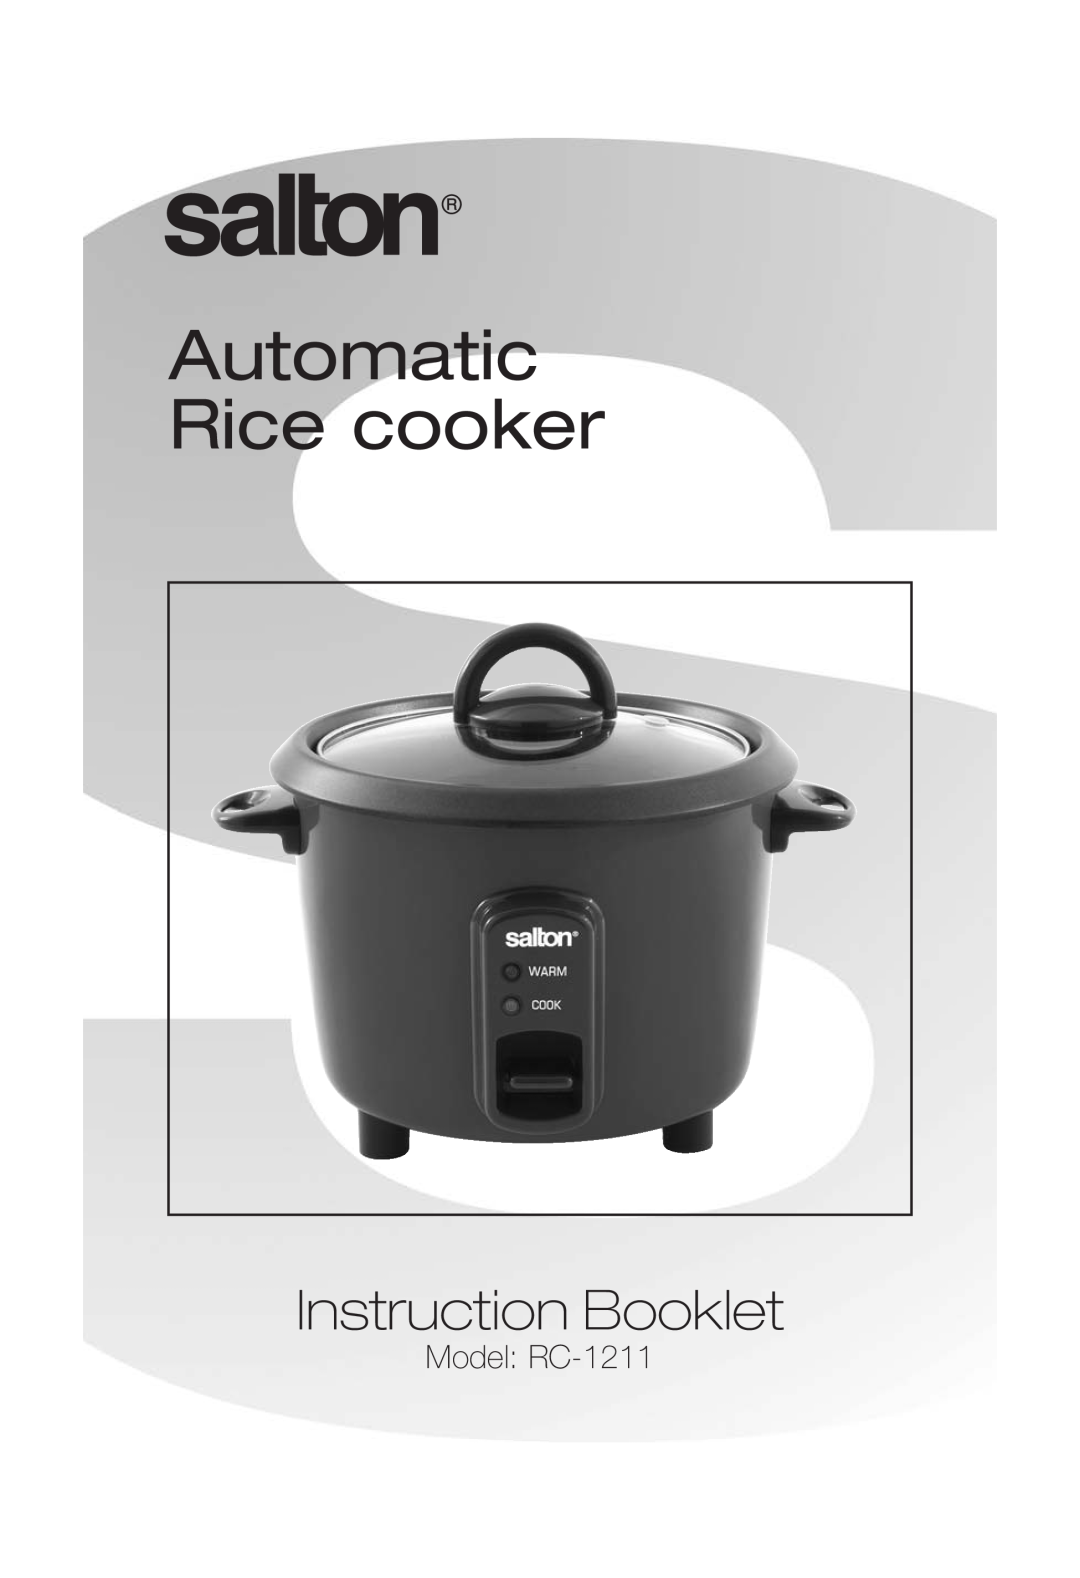 Salton manual Automatic Rice cooker, Instruction Booklet, Model RC-1211 